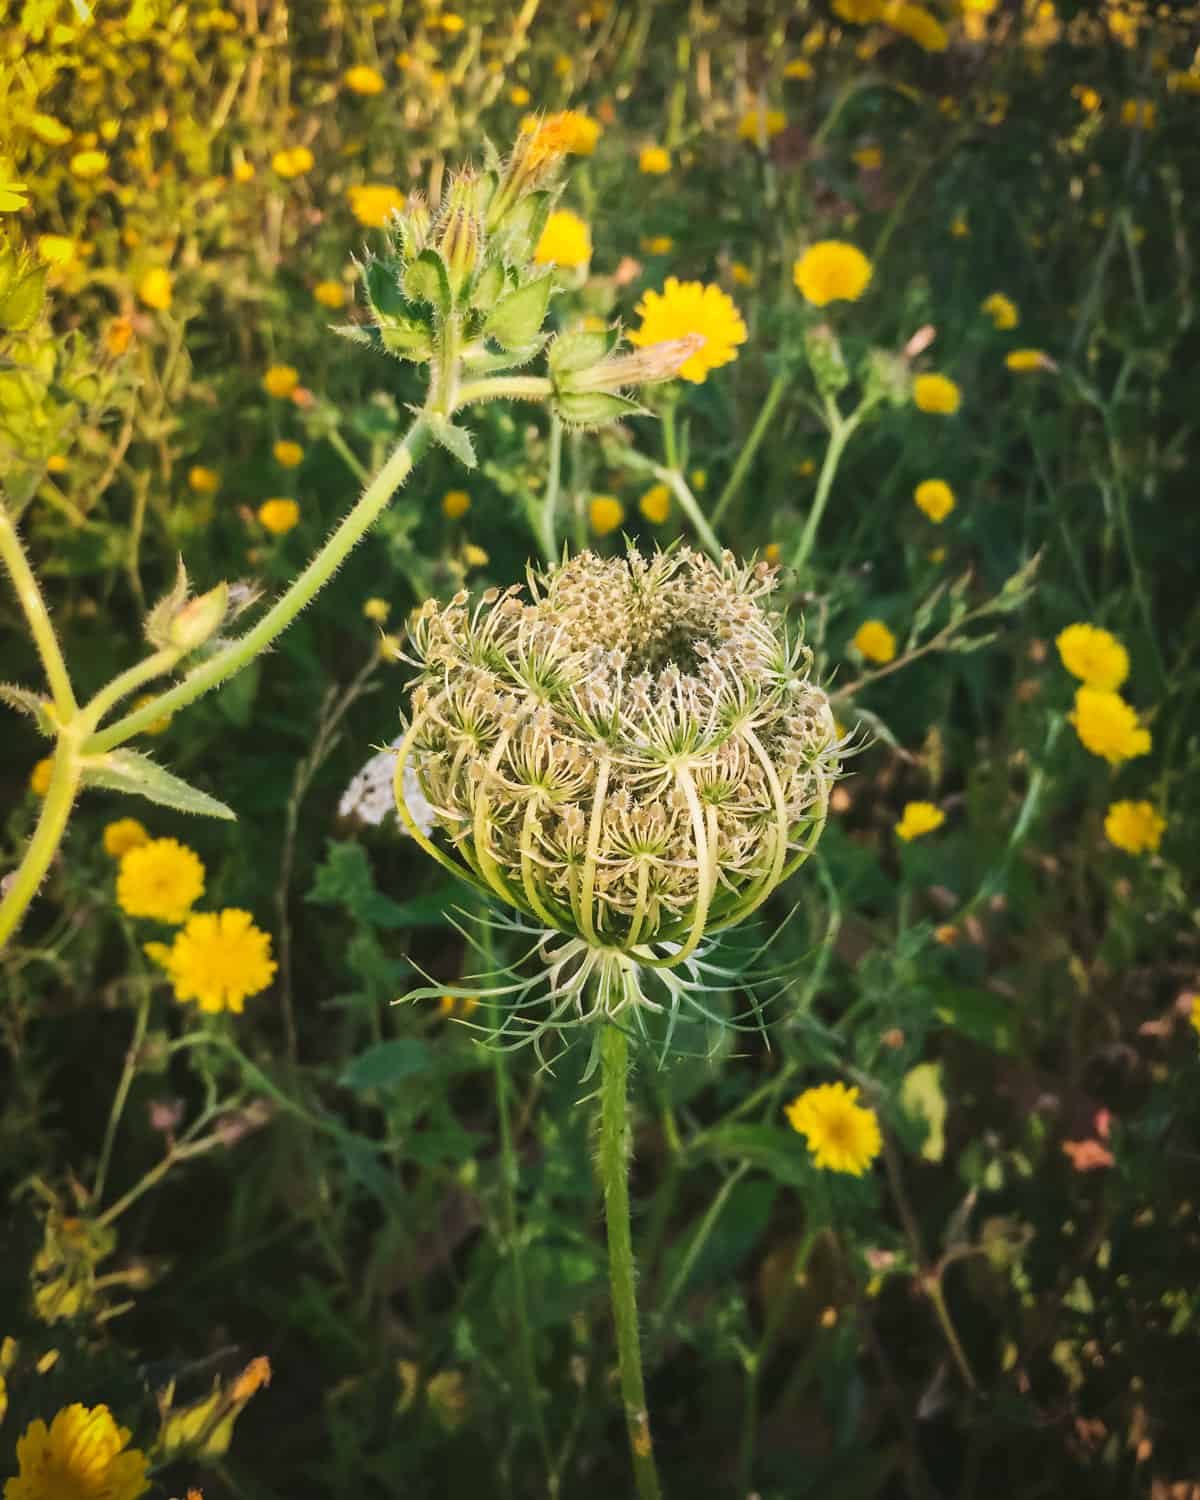 A Queen Anne's lace flower closed up in a bird's nest shape, with green grass and yellow flowers in the background. 